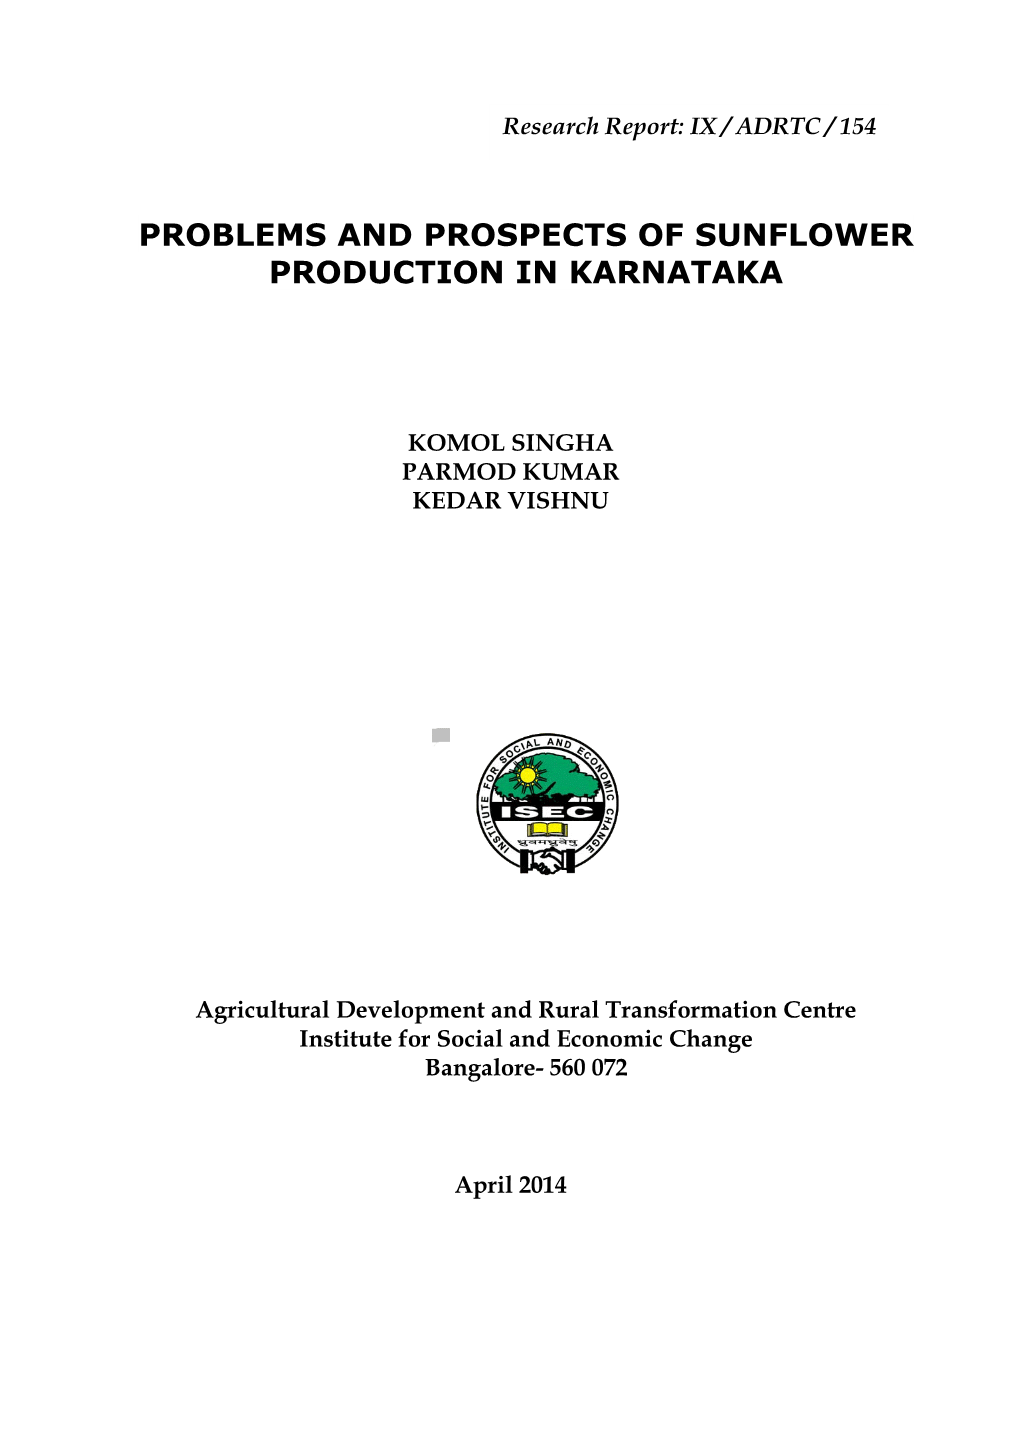 Problems and Prospects of Sunflower Production in Karnataka